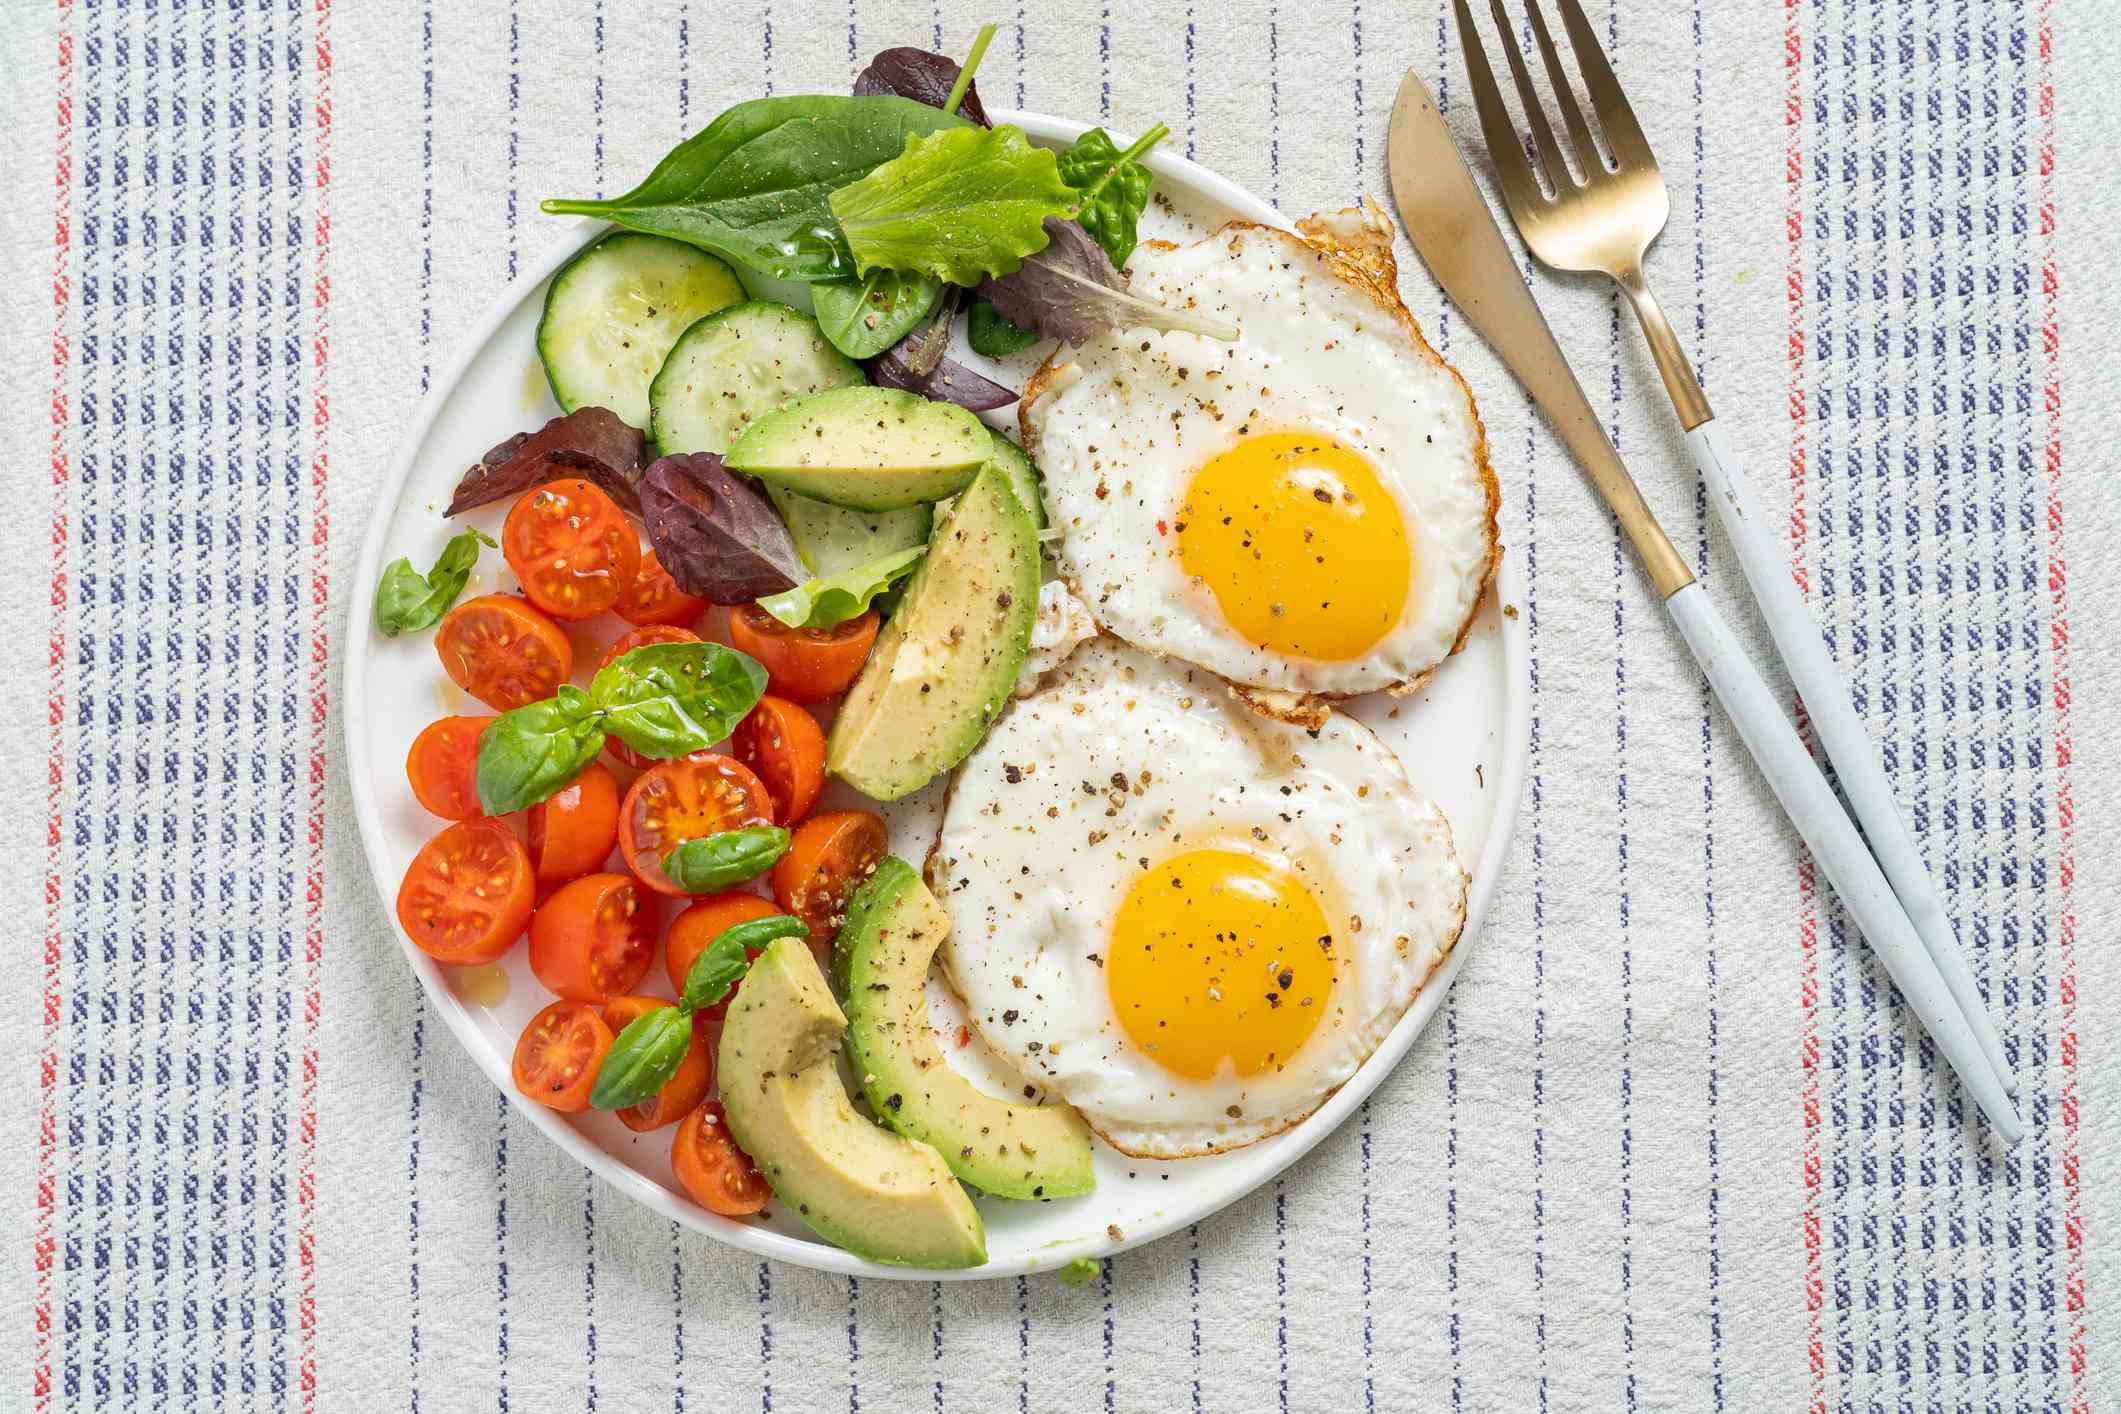 Healthy And Convenient Breakfast Options By Good Food Made Simple